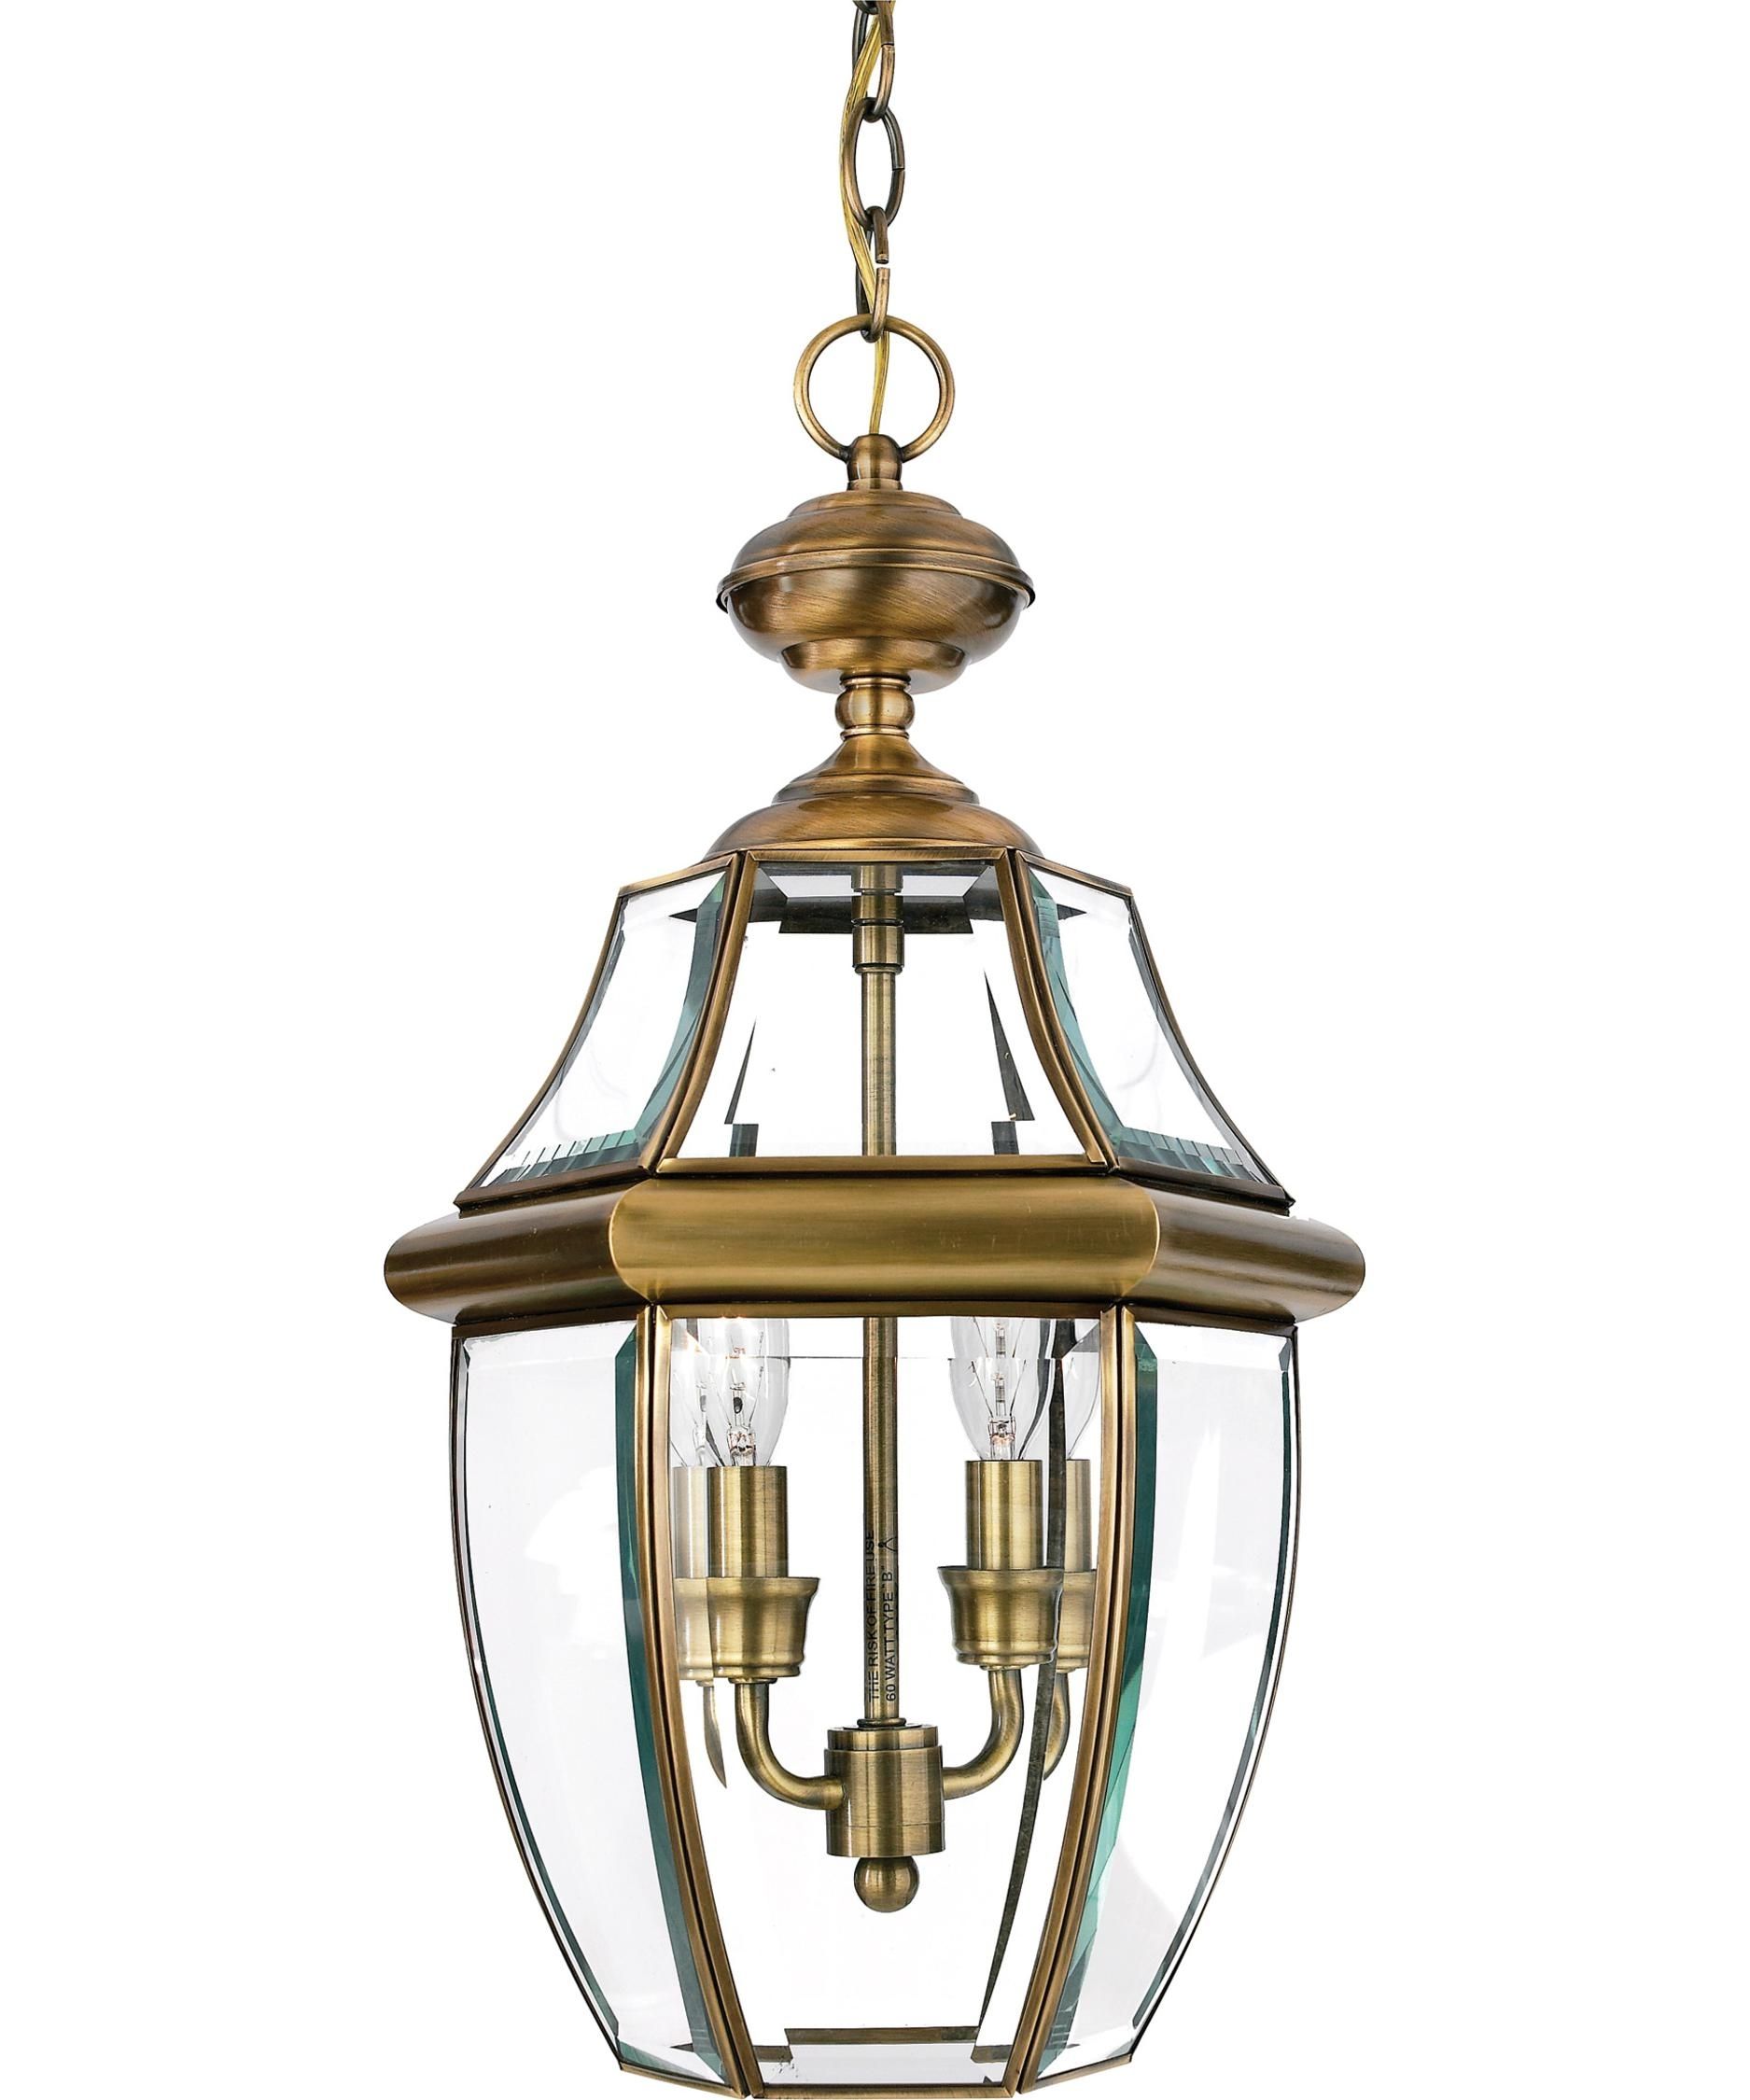 Quoizel Ny1178 Newbury 10 Inch Wide 2 Light Outdoor Hanging Lantern Regarding Quoizel Outdoor Hanging Lights (View 5 of 15)